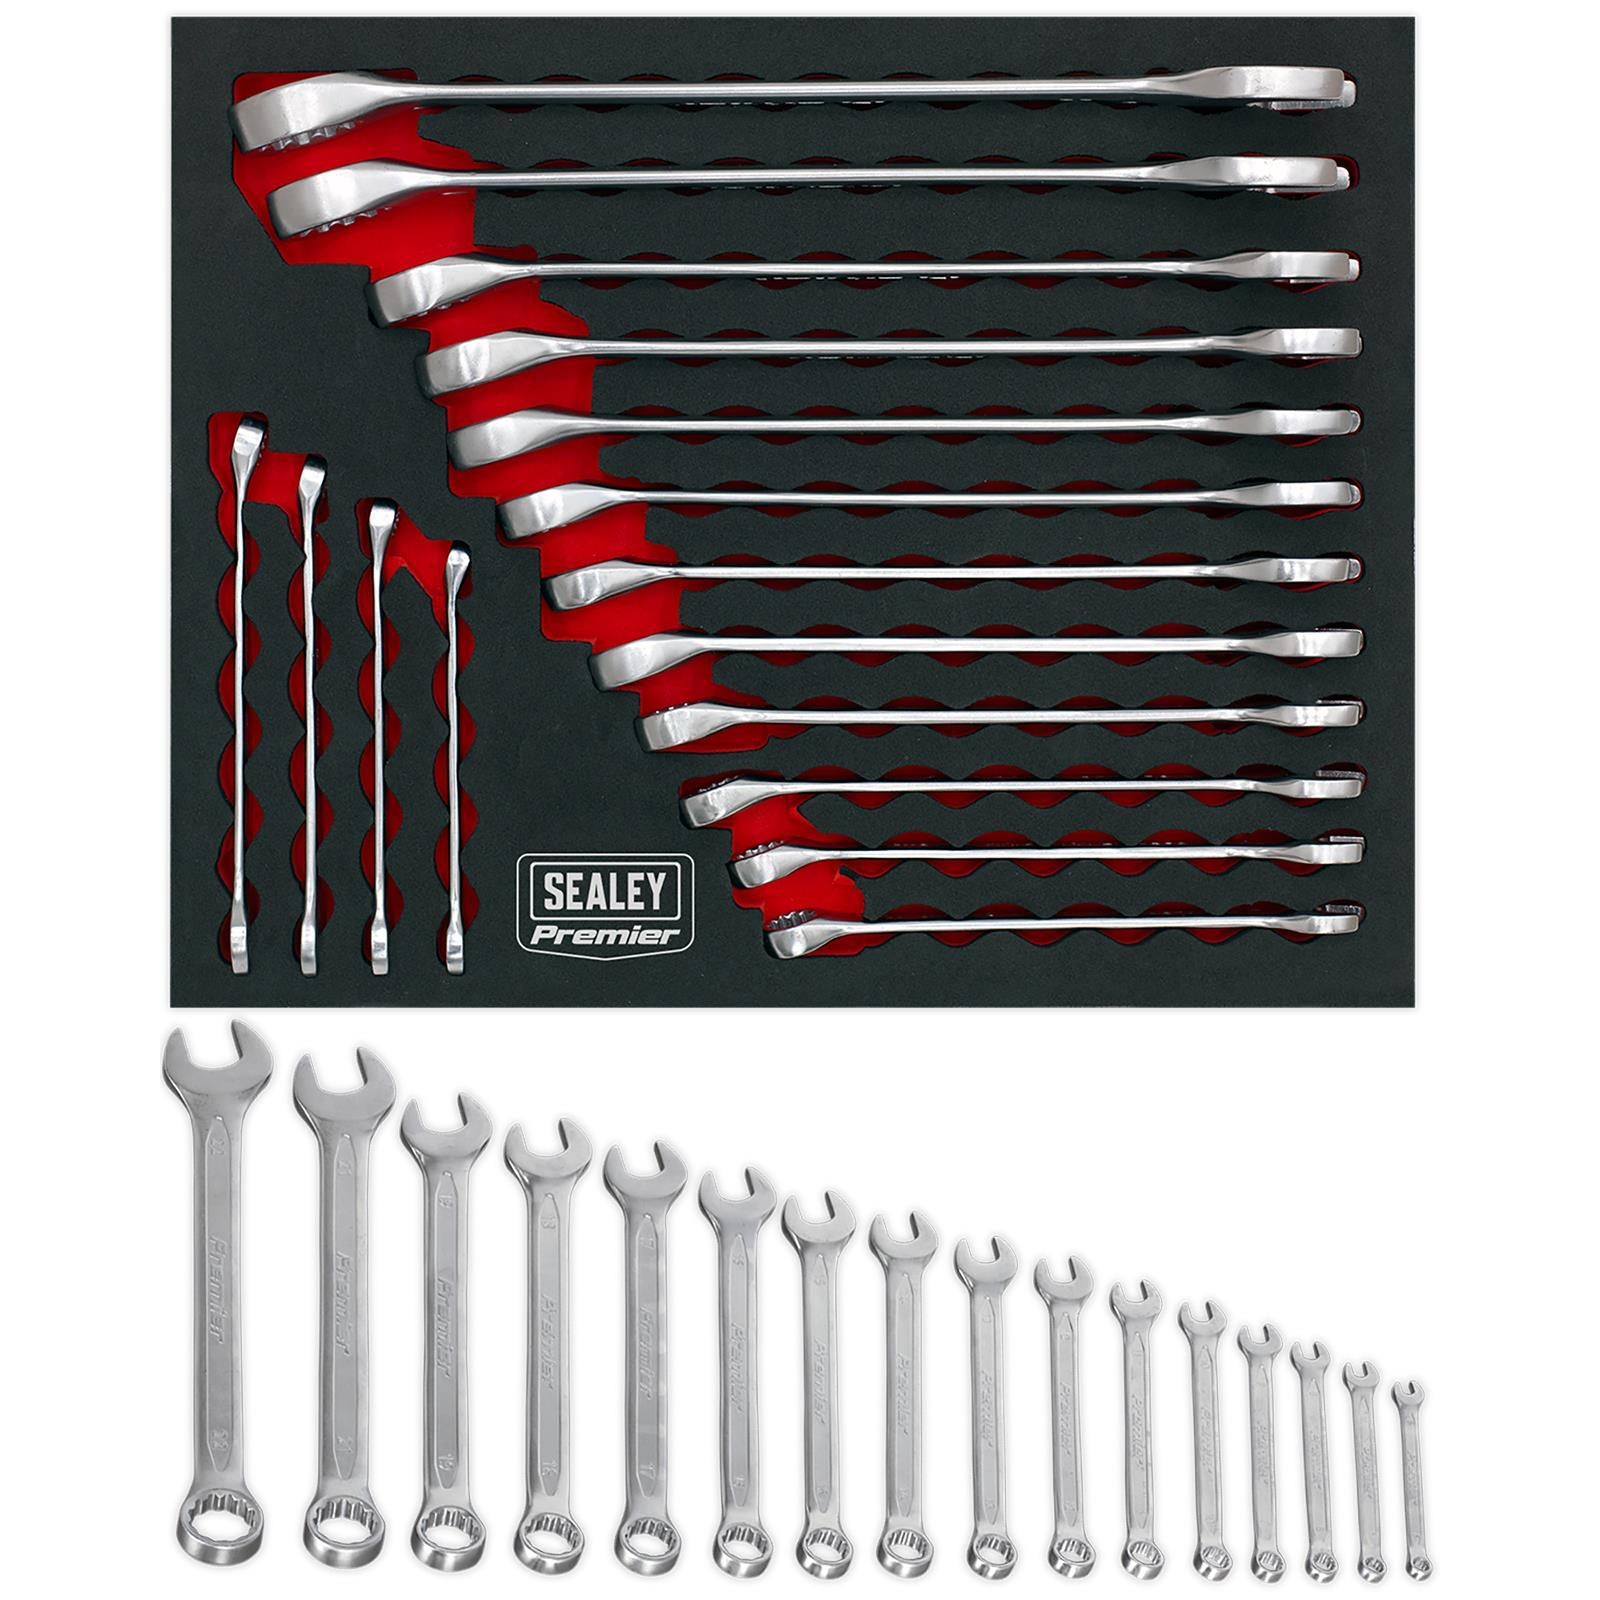 Sealey Premier 16 Piece Cold Stamped Combination Spanner Set Metric 6-22mm